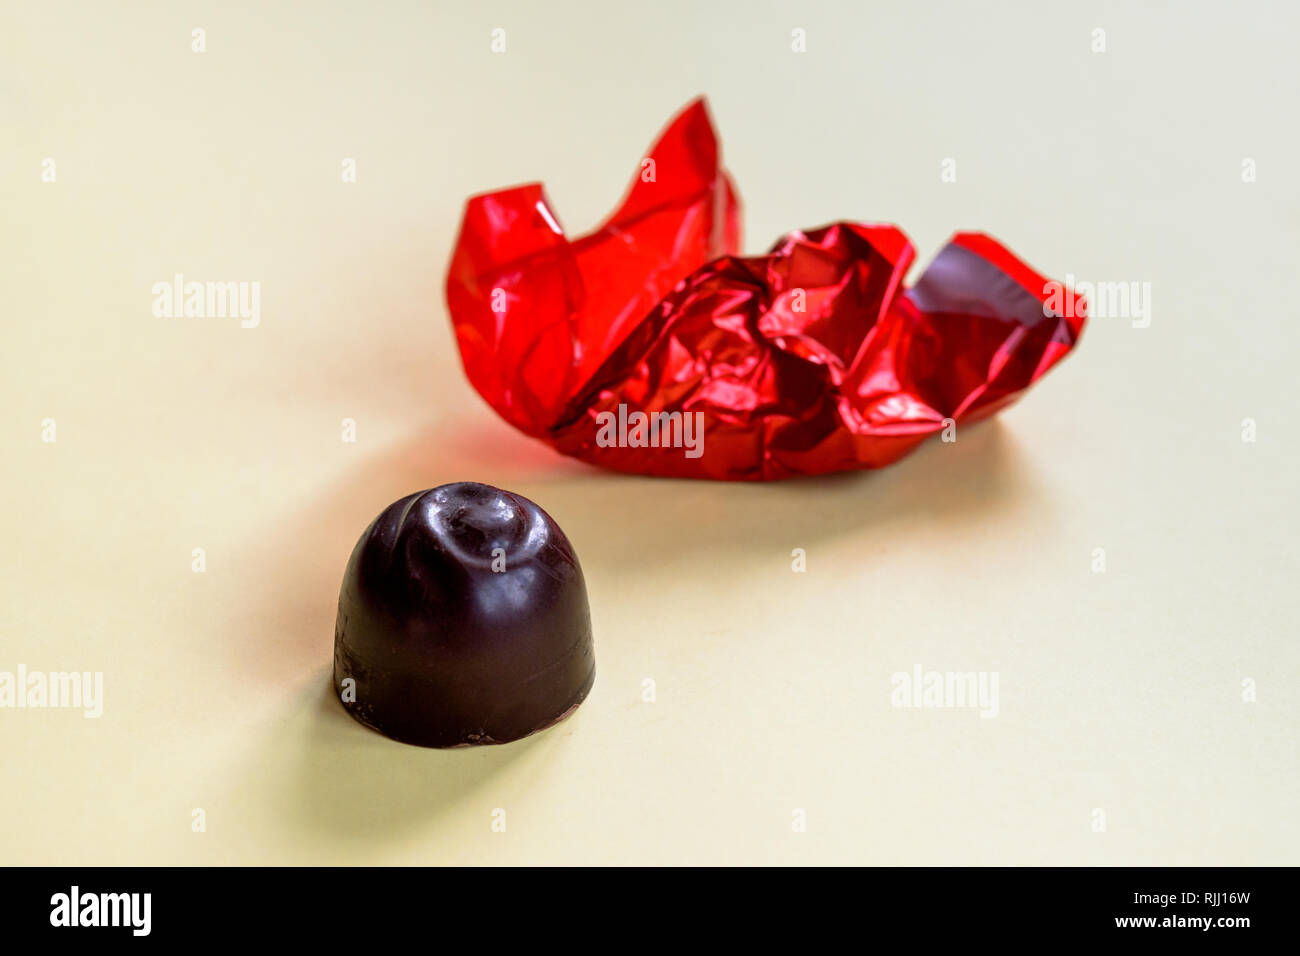 An unwrapped chocolate cherry bonbon with the wrinkled red wrapping paper and isolated on a yellow background. Stock Photo